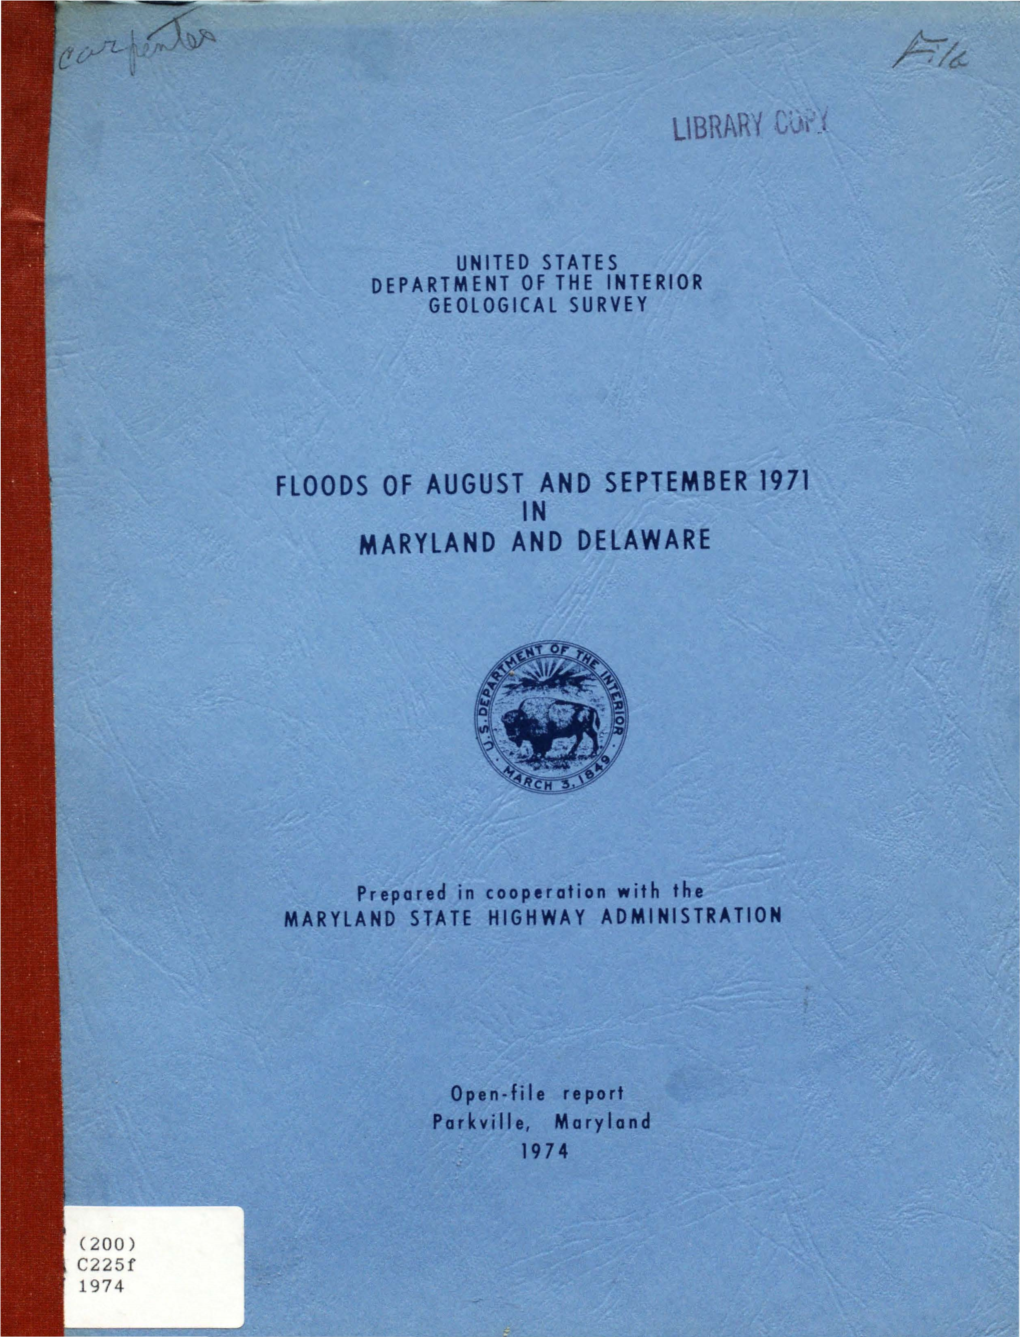 Floods of August and September 1971 in Maryland and Delaware